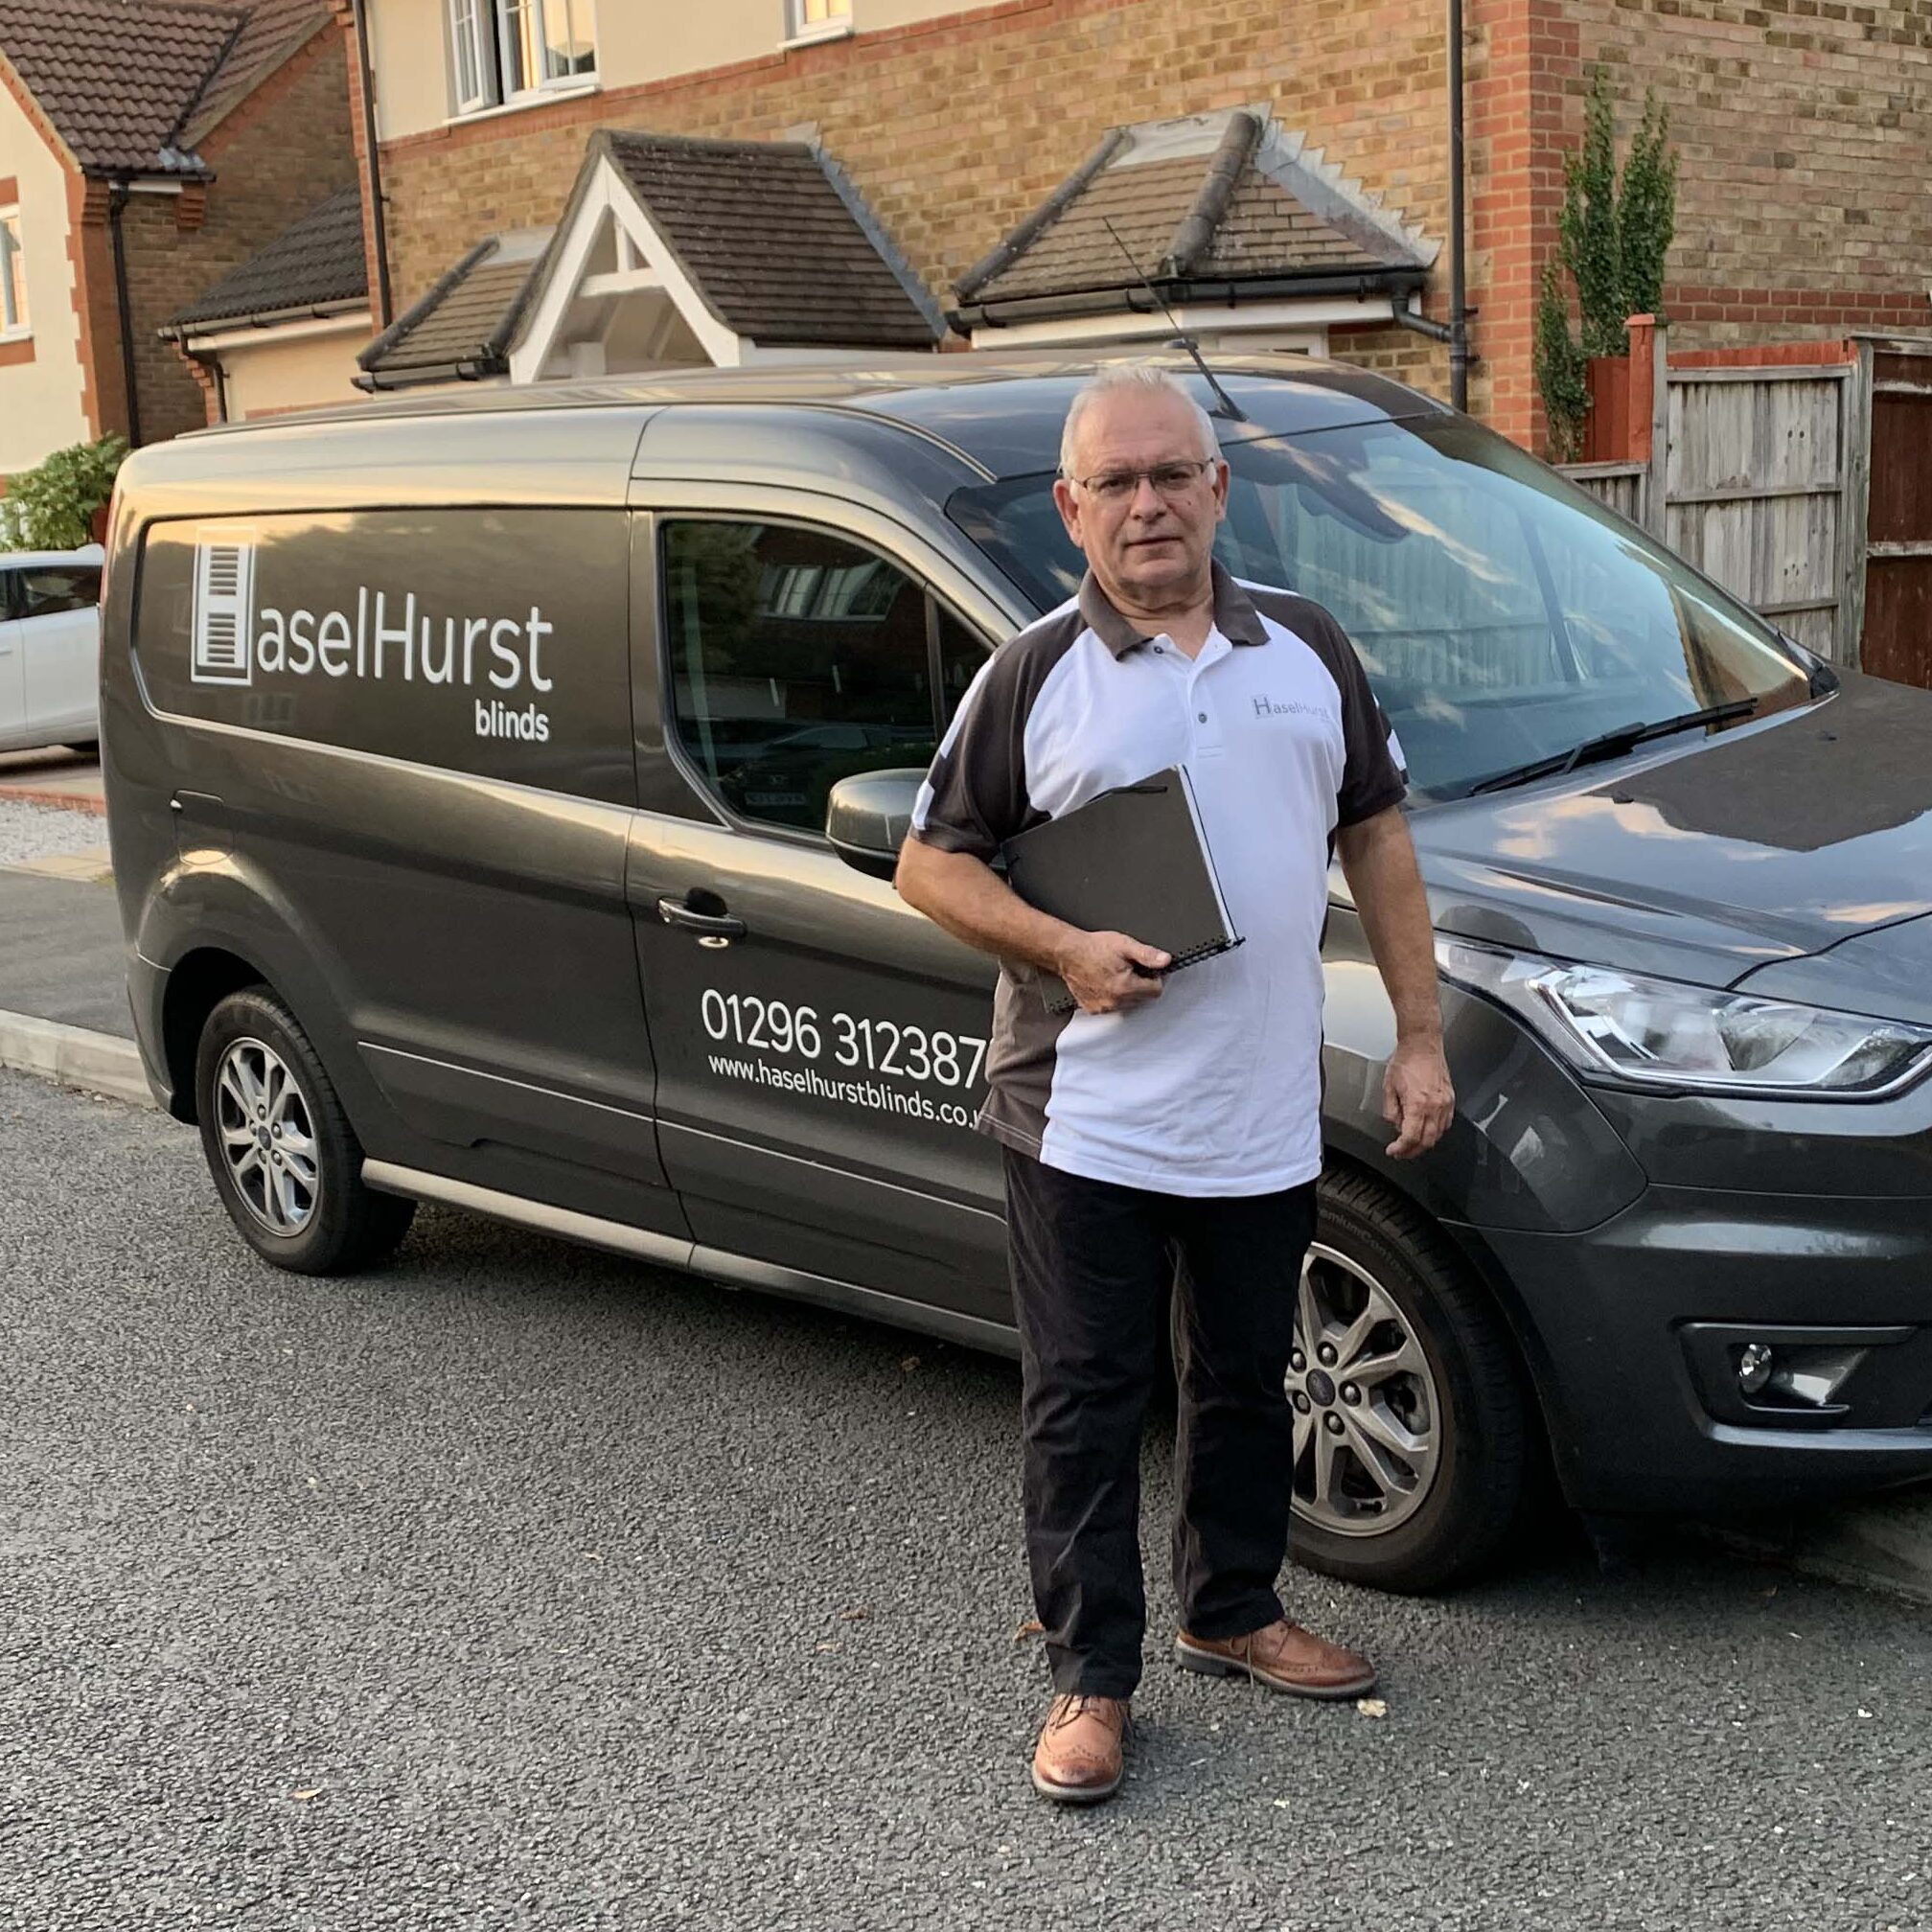 haselhurst blinds aylesbury company van and owner